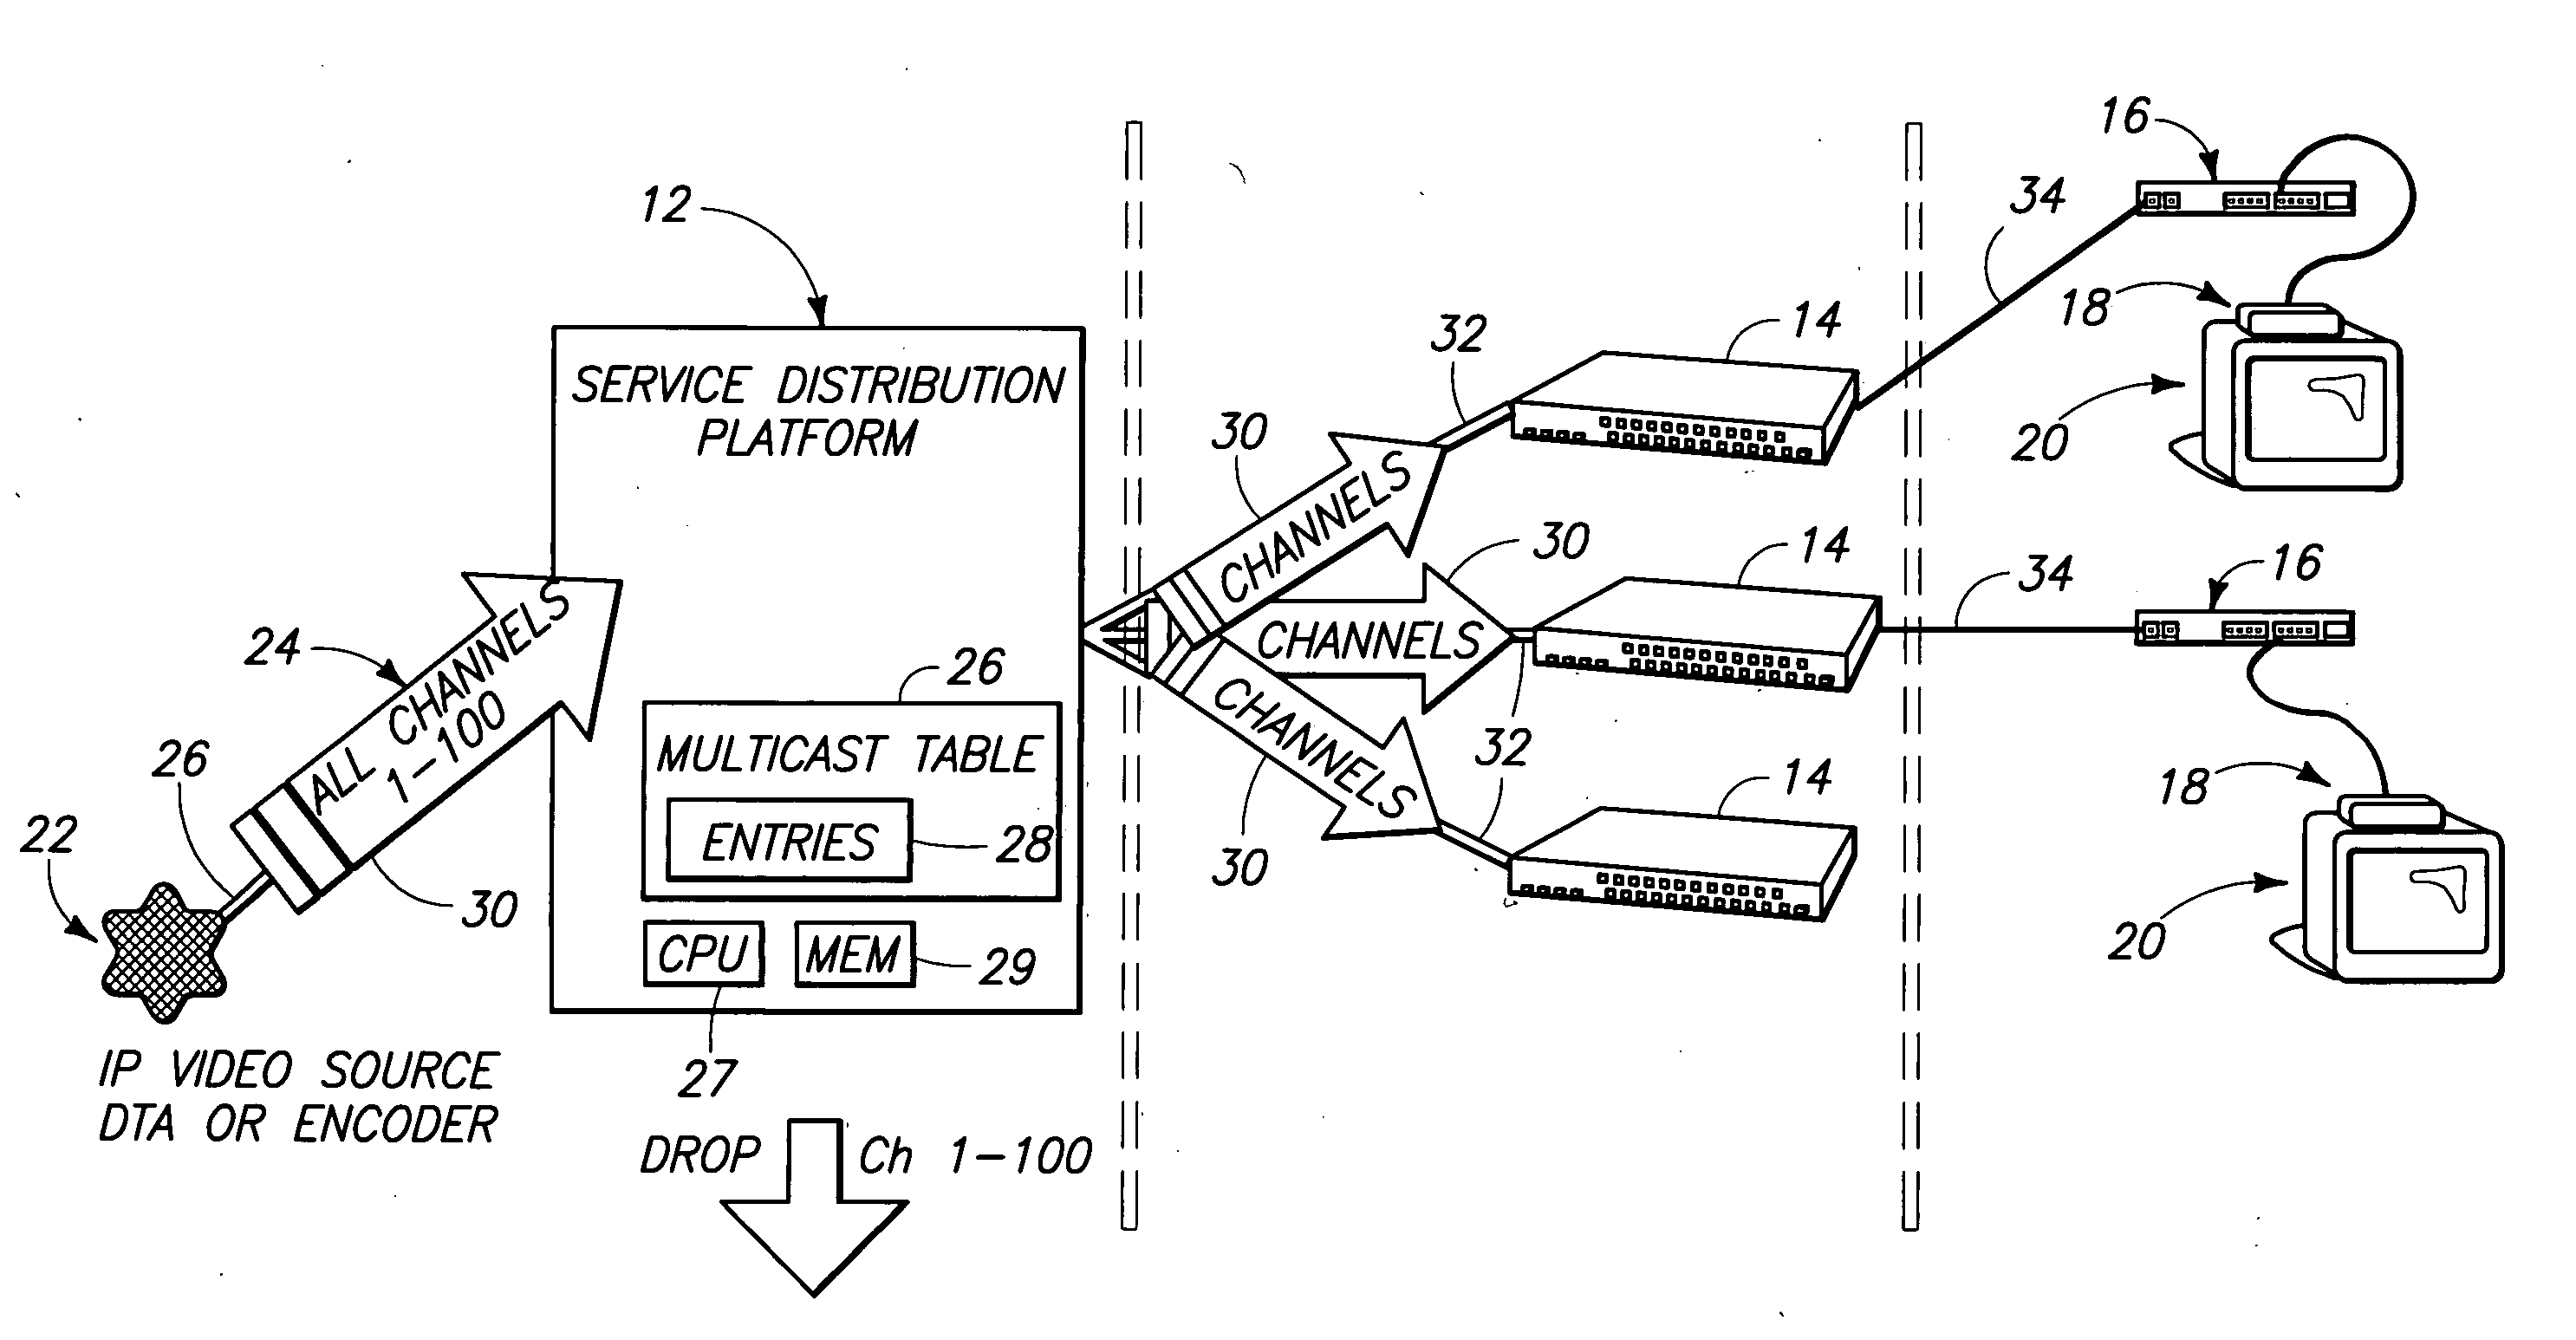 Multicast services control system and method